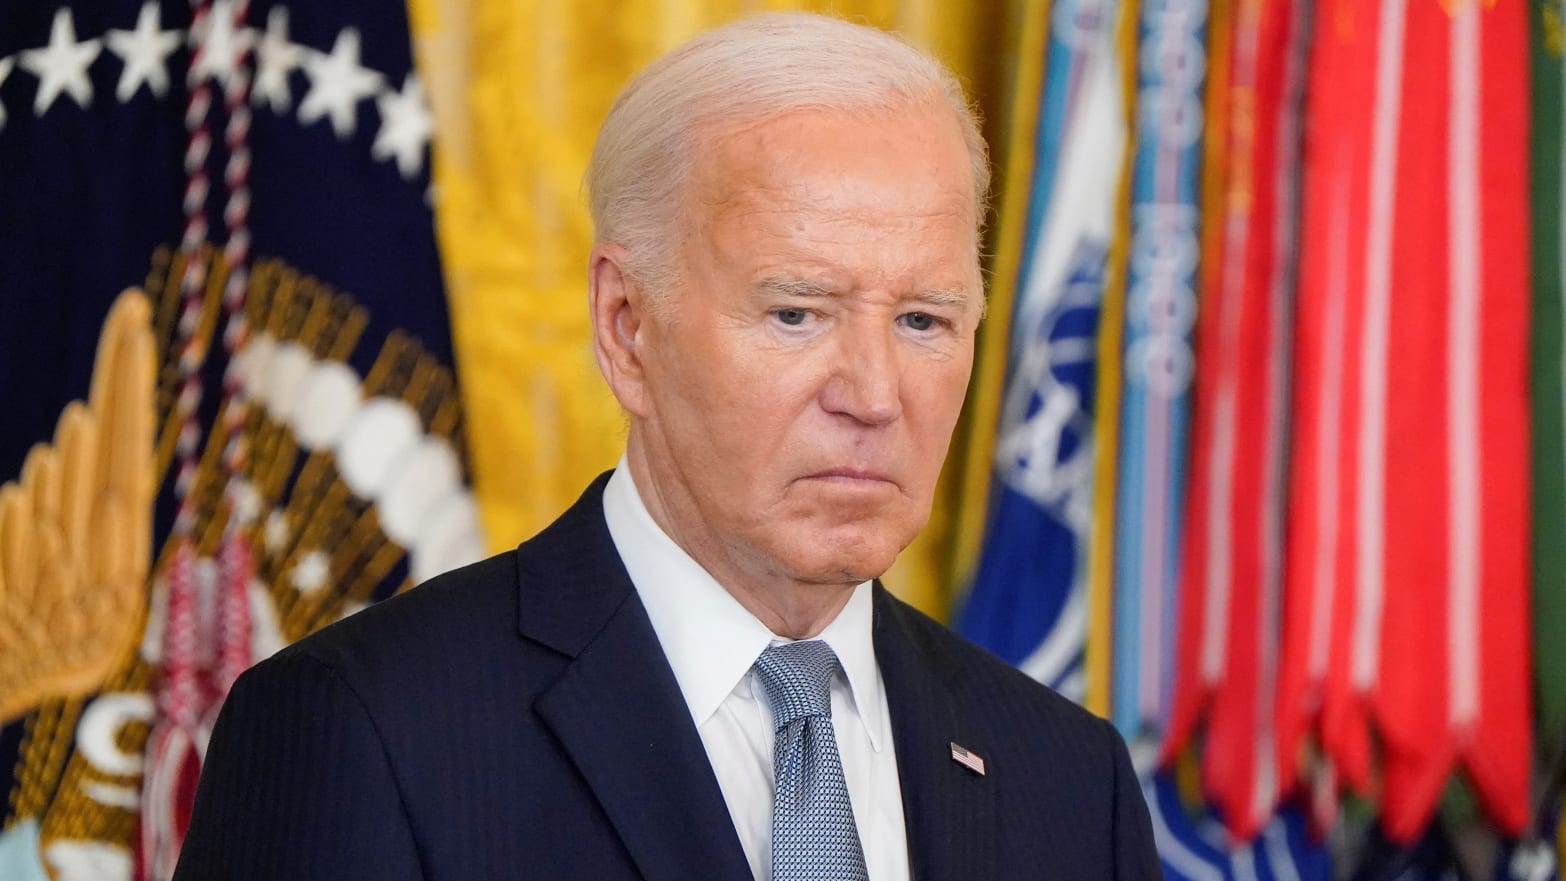 Joe Biden stares down while at a ceremony in the White House.